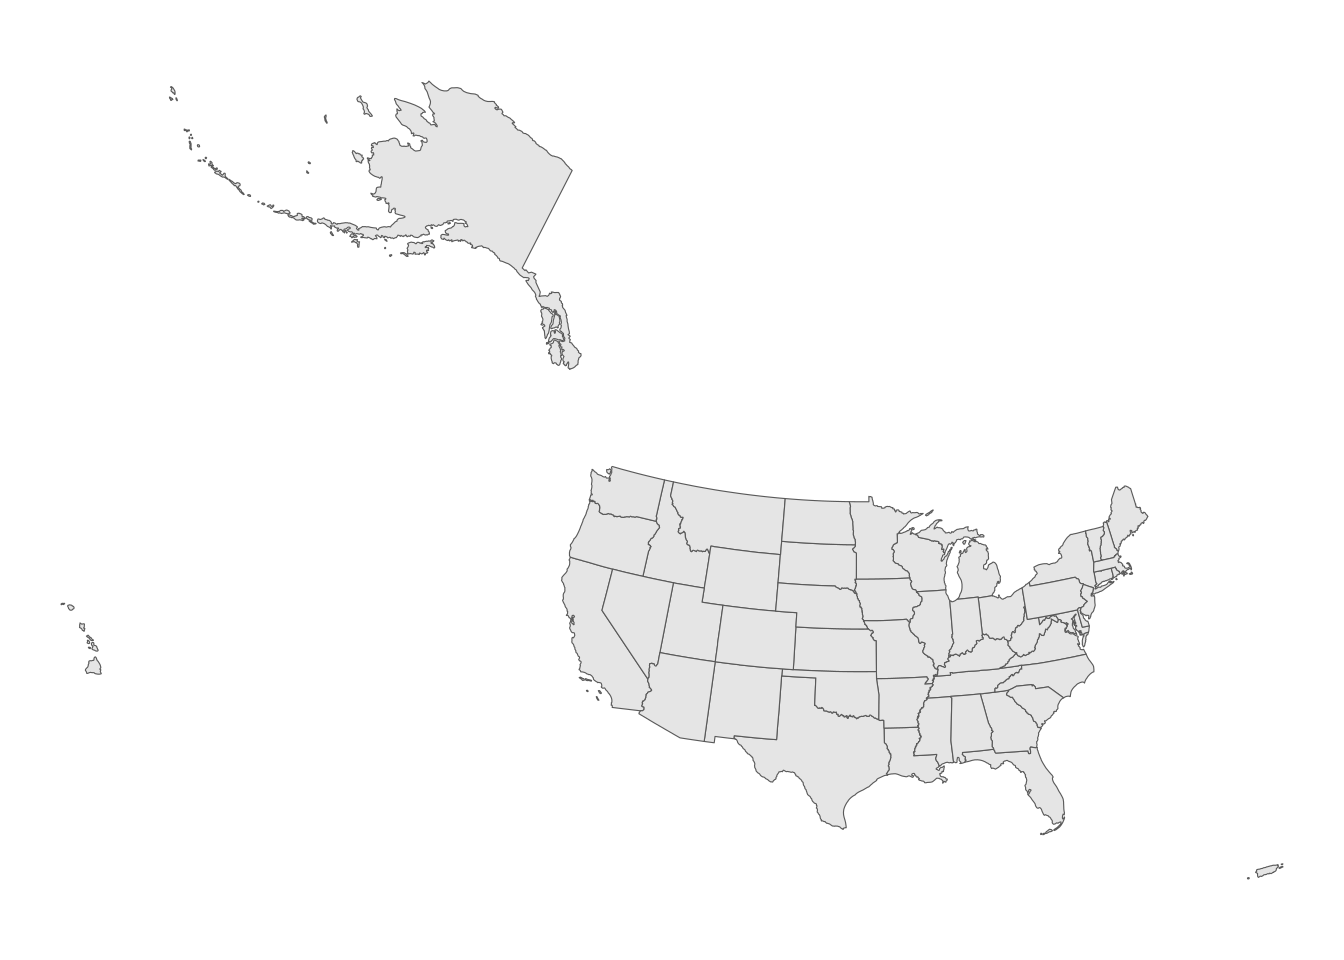 Equal-area CRS for US states